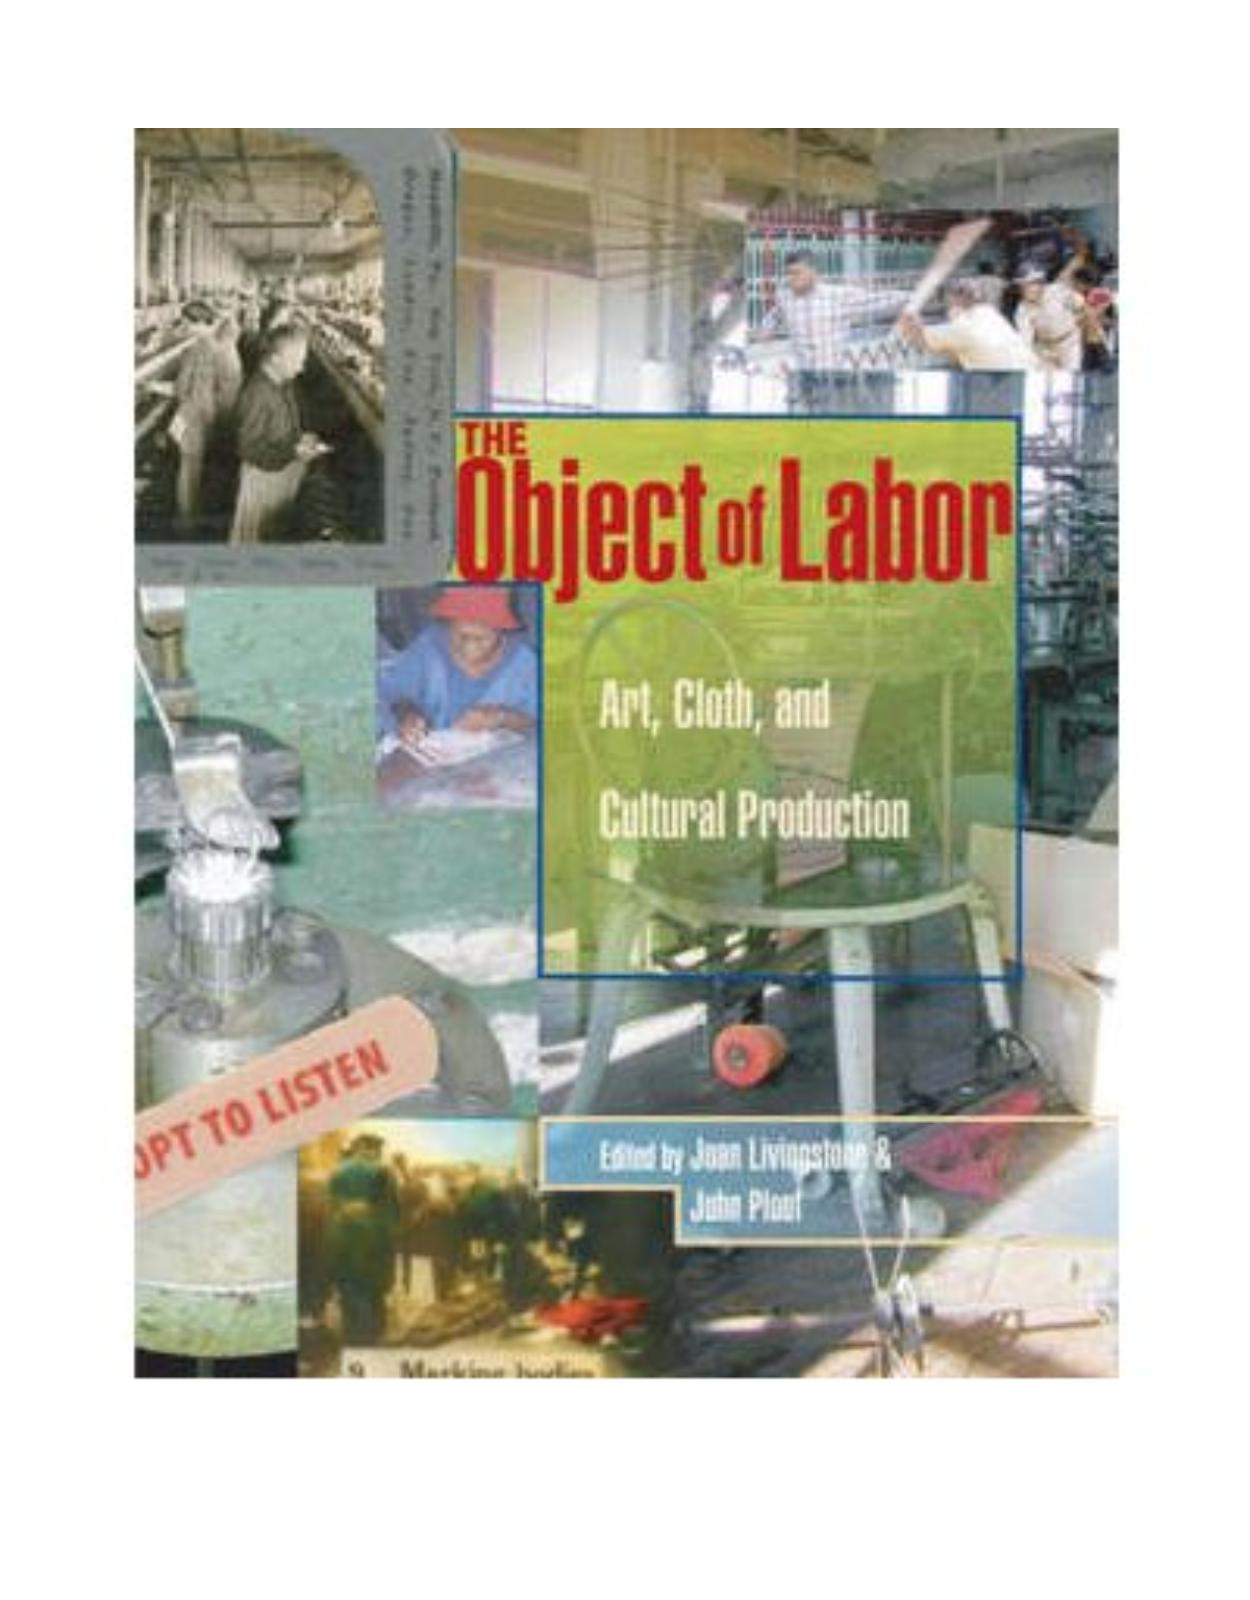 The Object of Labor: Art, Cloth and Cultural Production